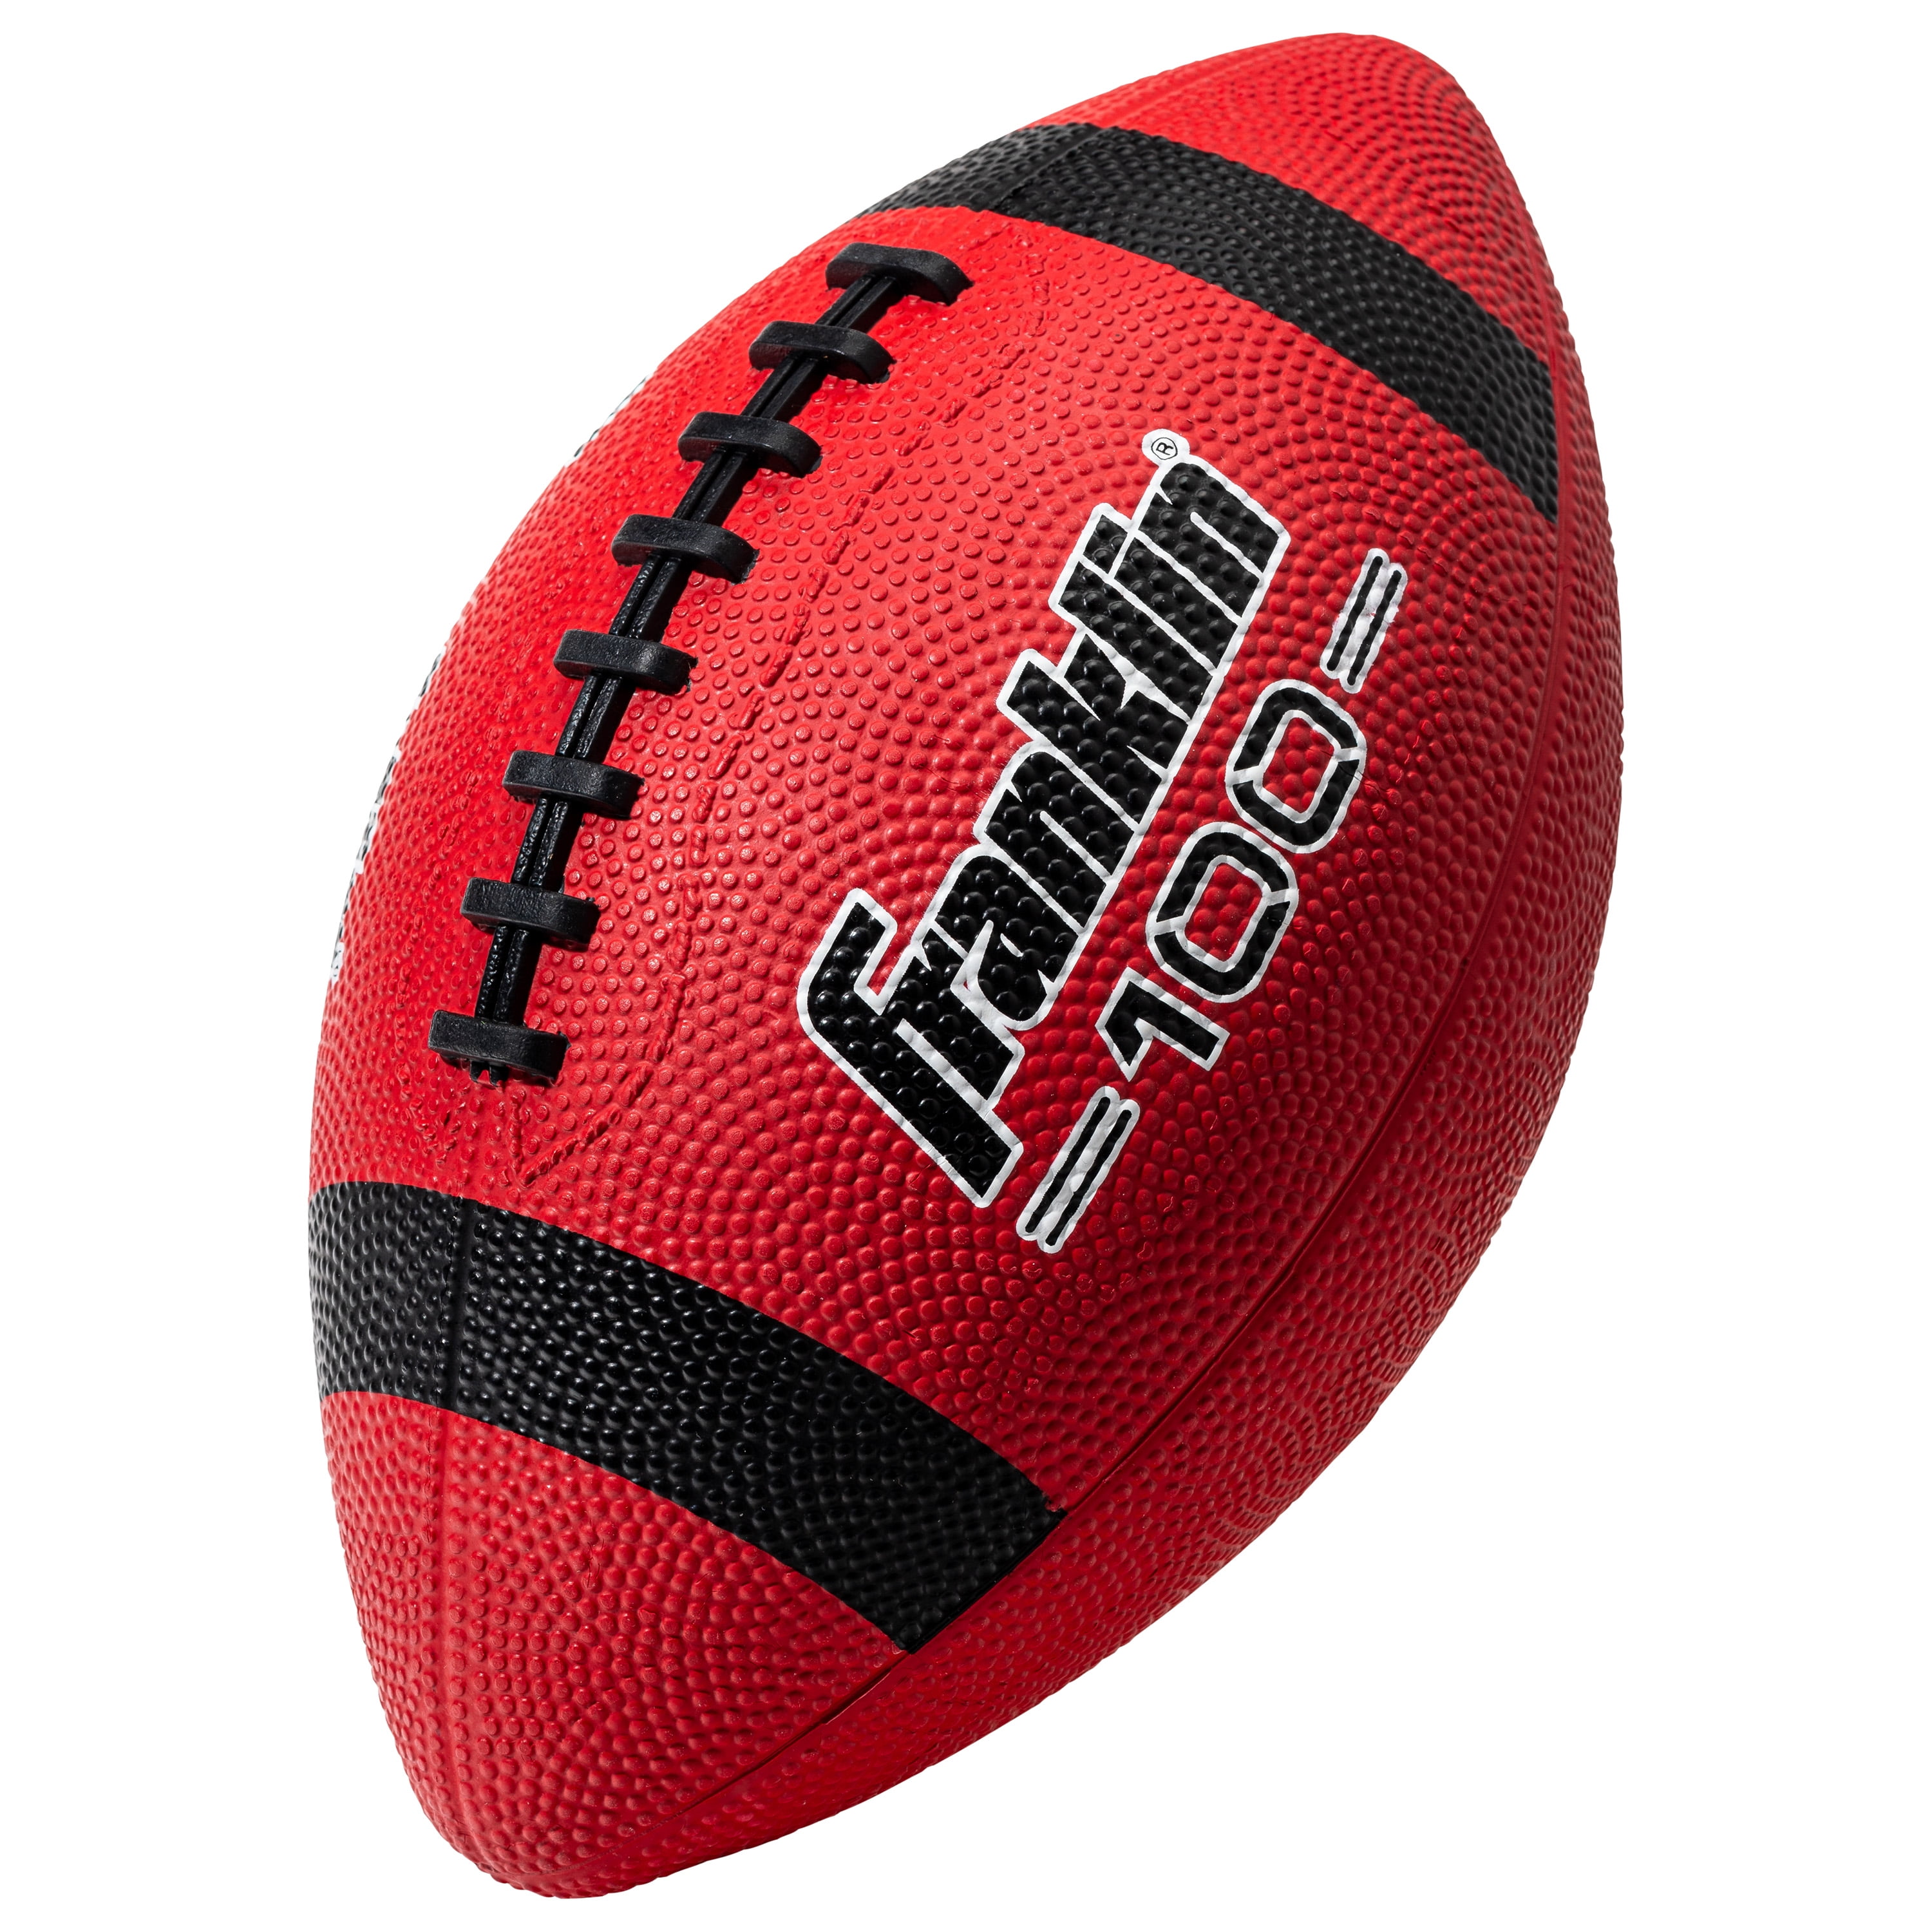 NEW INFLATABLE FOOTBALL FOOT BALL OUTDOOR GAMES FUN BLACK RED GREEN BLUE ENGLAND 